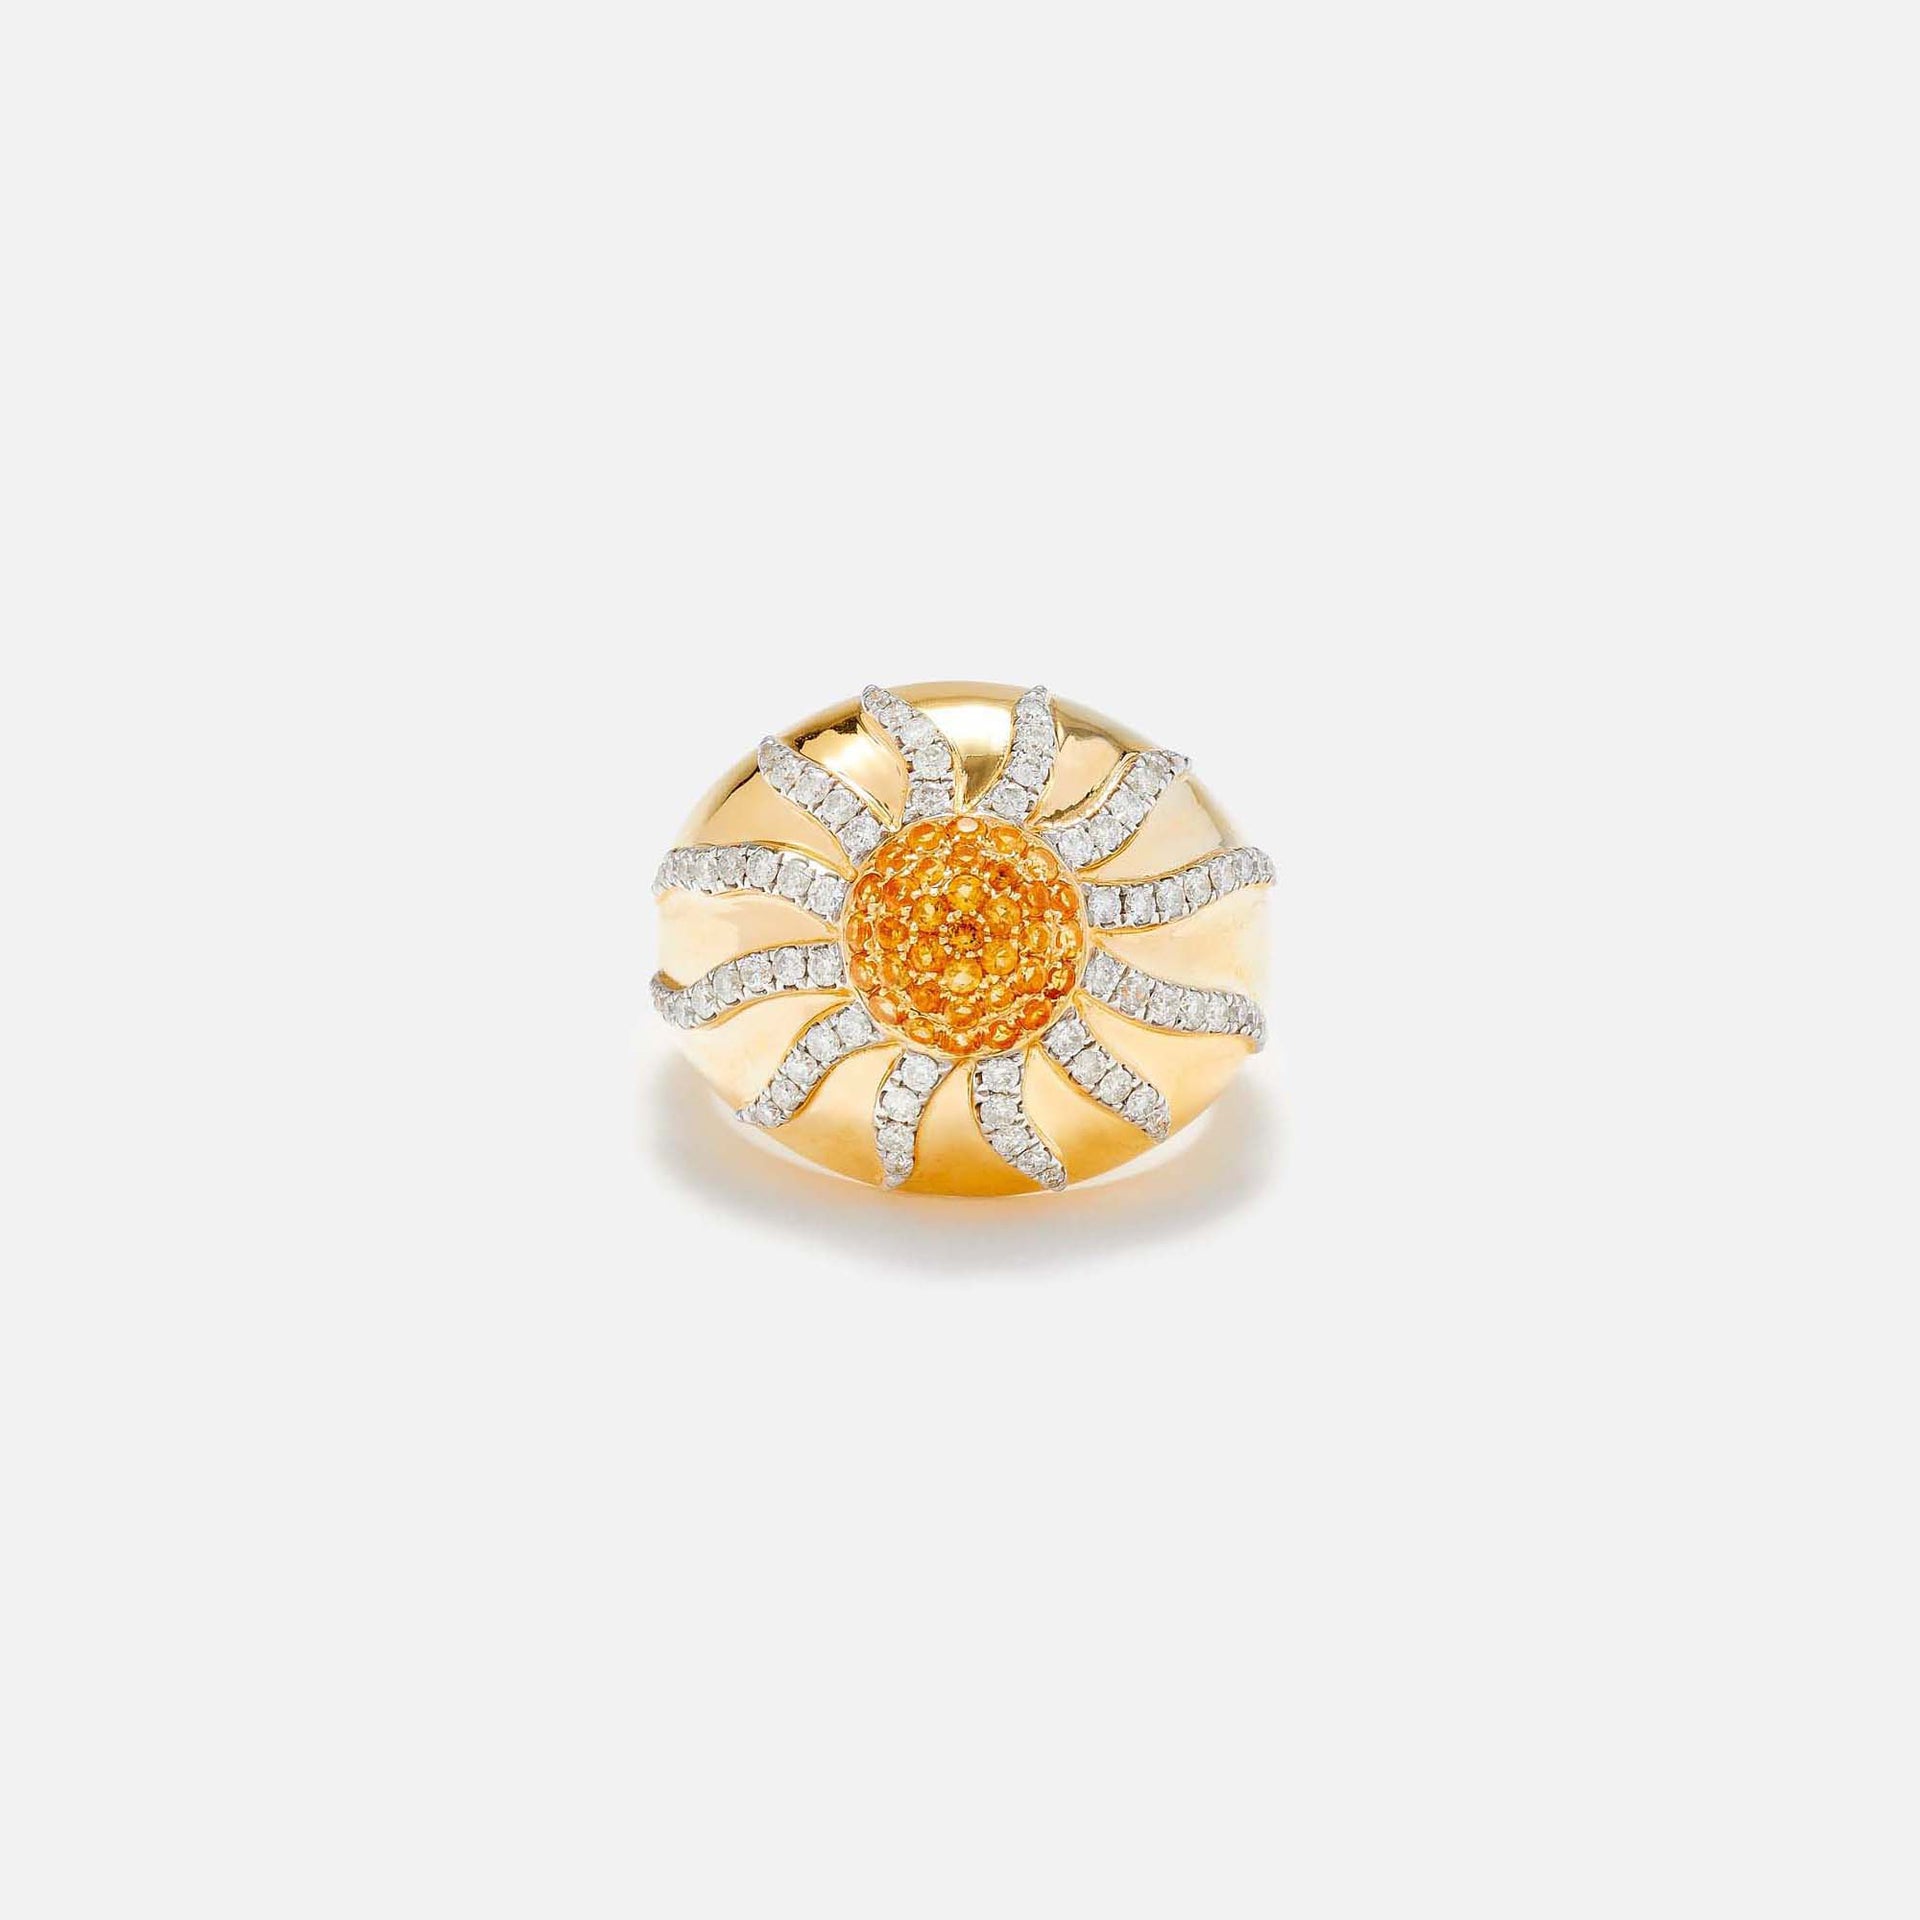 Yvonne Leon Les Soleils Sun Dome Ring in 18K Yellow Gold - Yellow Gold